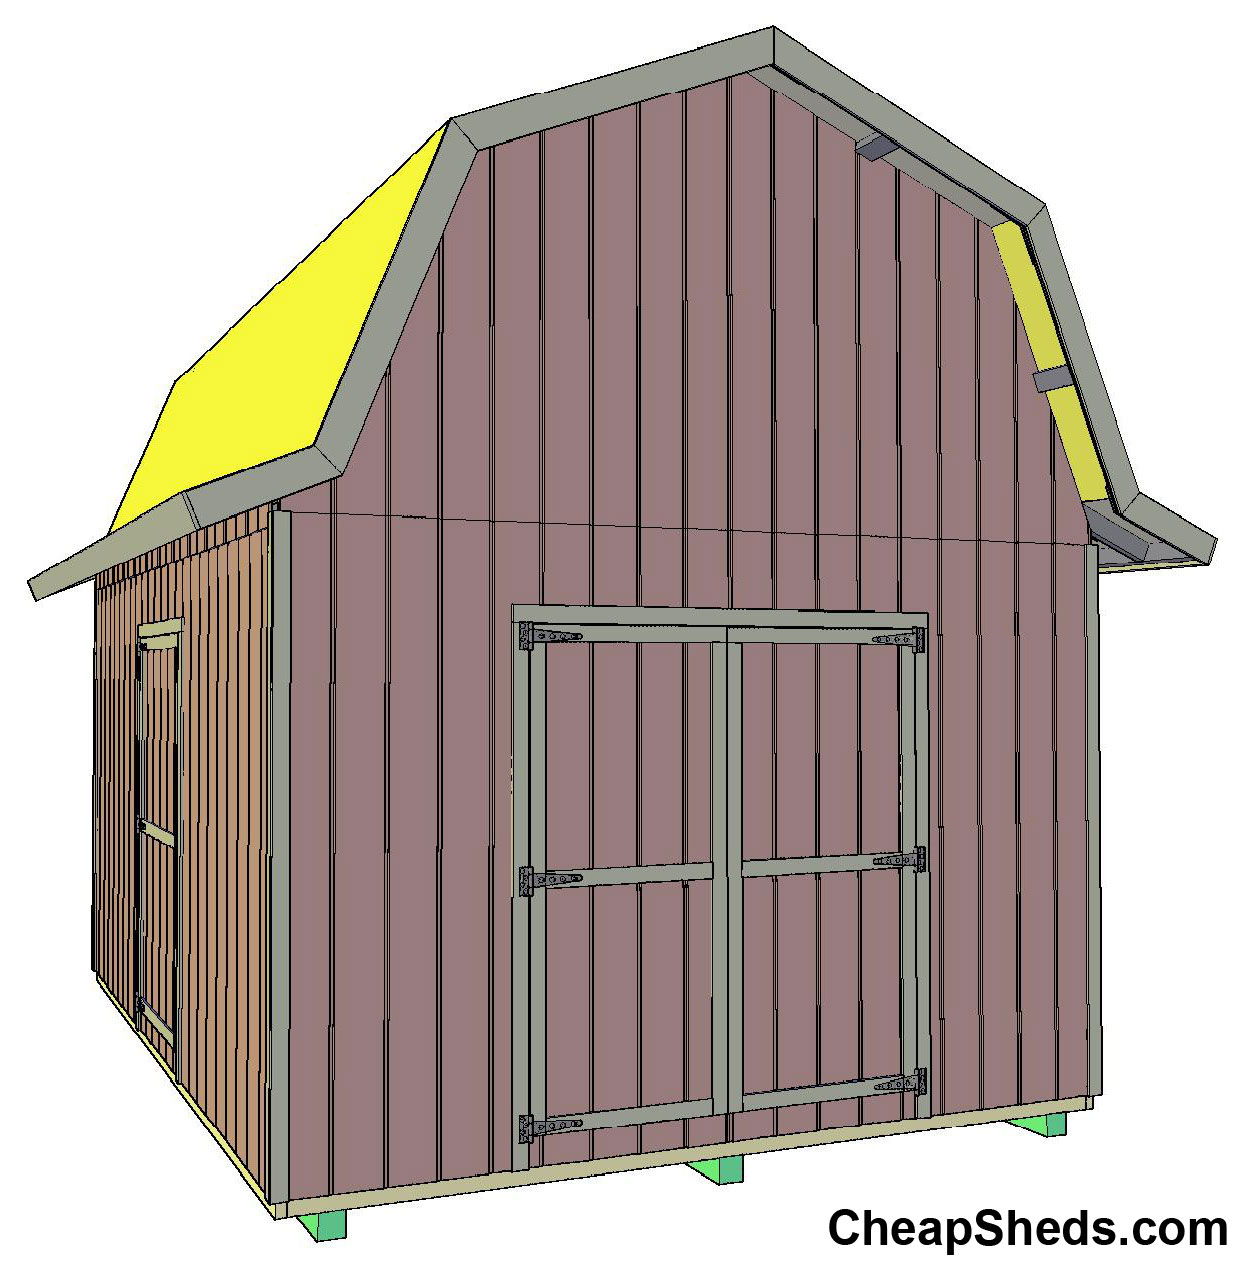 Compare these Tall Barn Style Plans to my other 3 shed plans at the ...